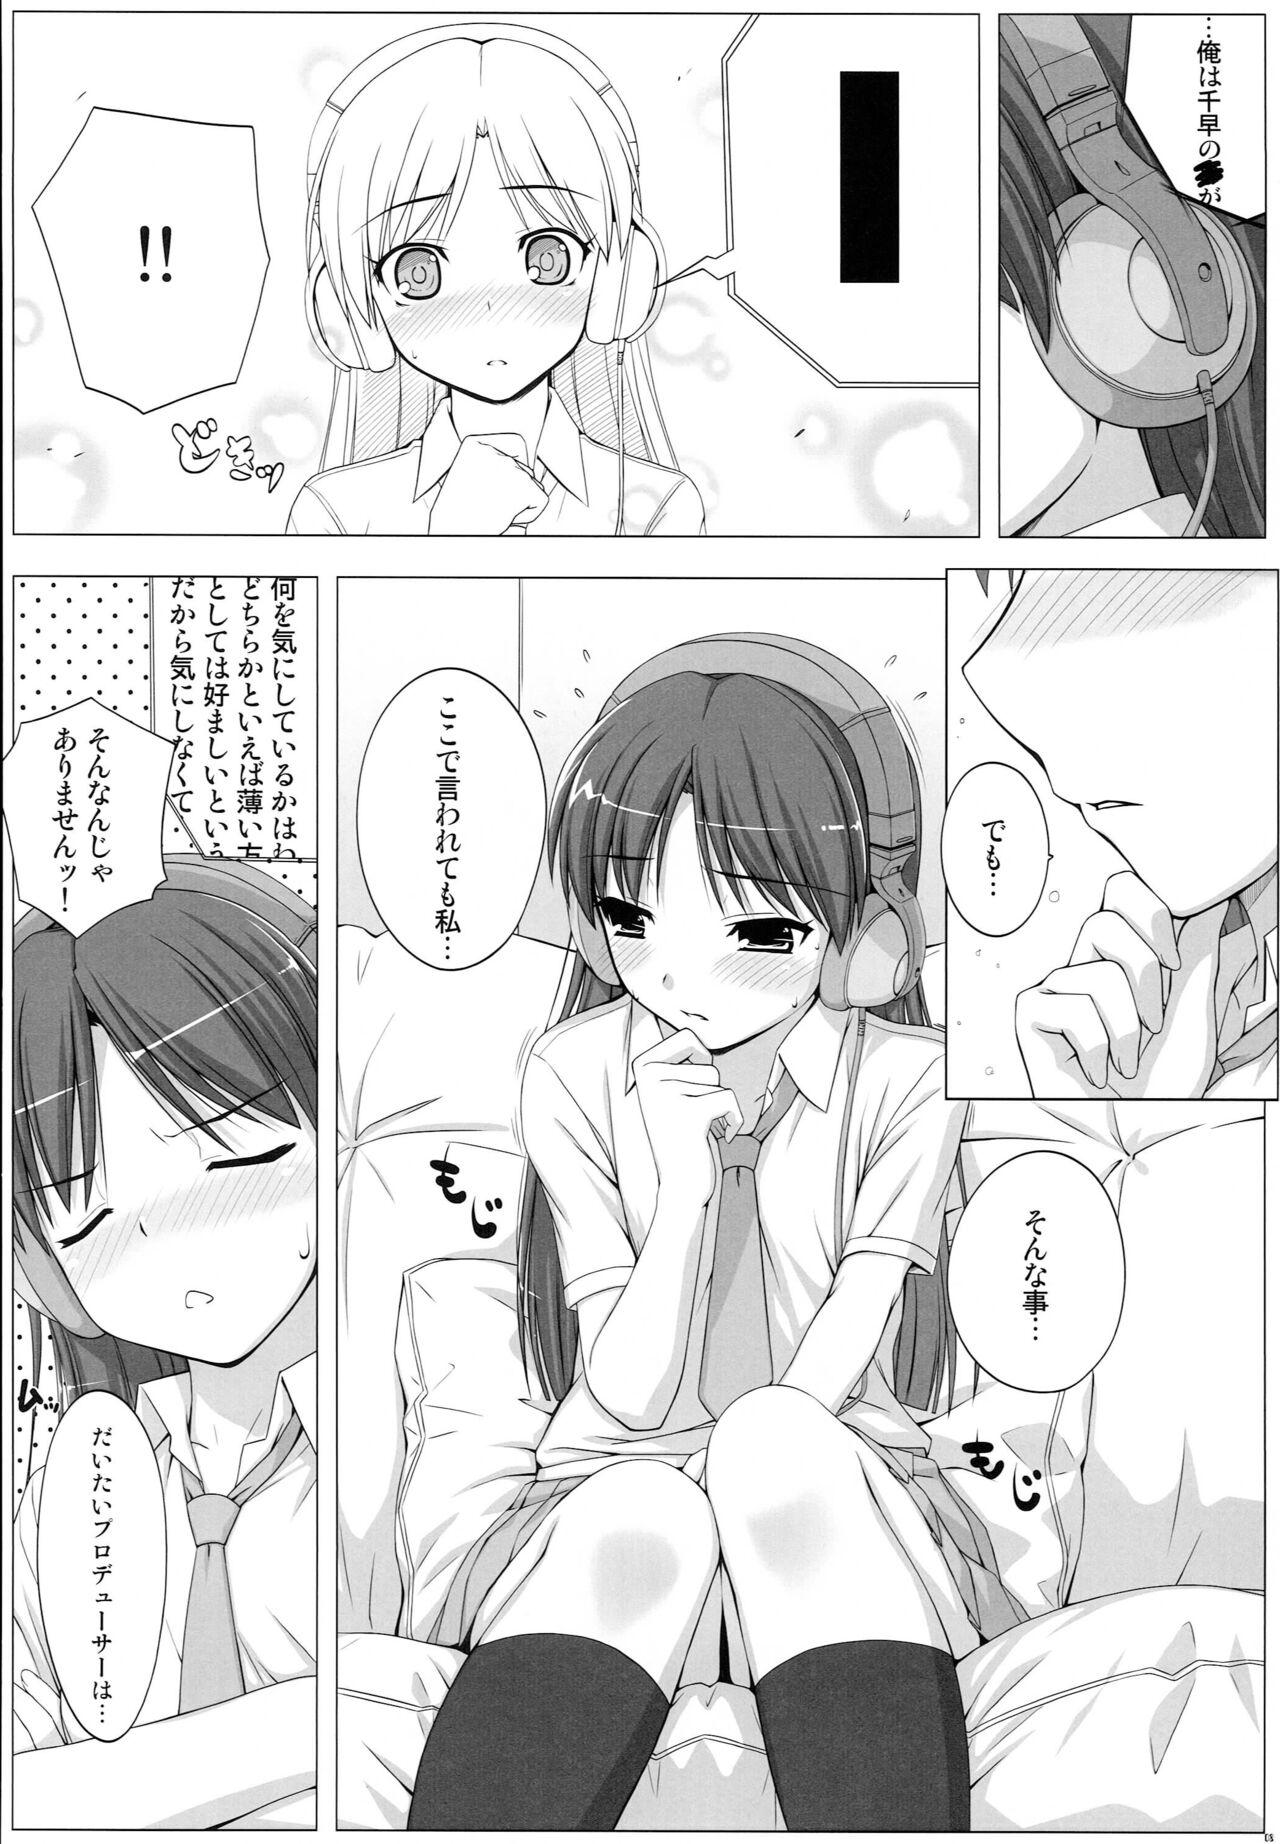 Pounding BAD COMMUNICATION? 09 - The idolmaster Parties - Page 7